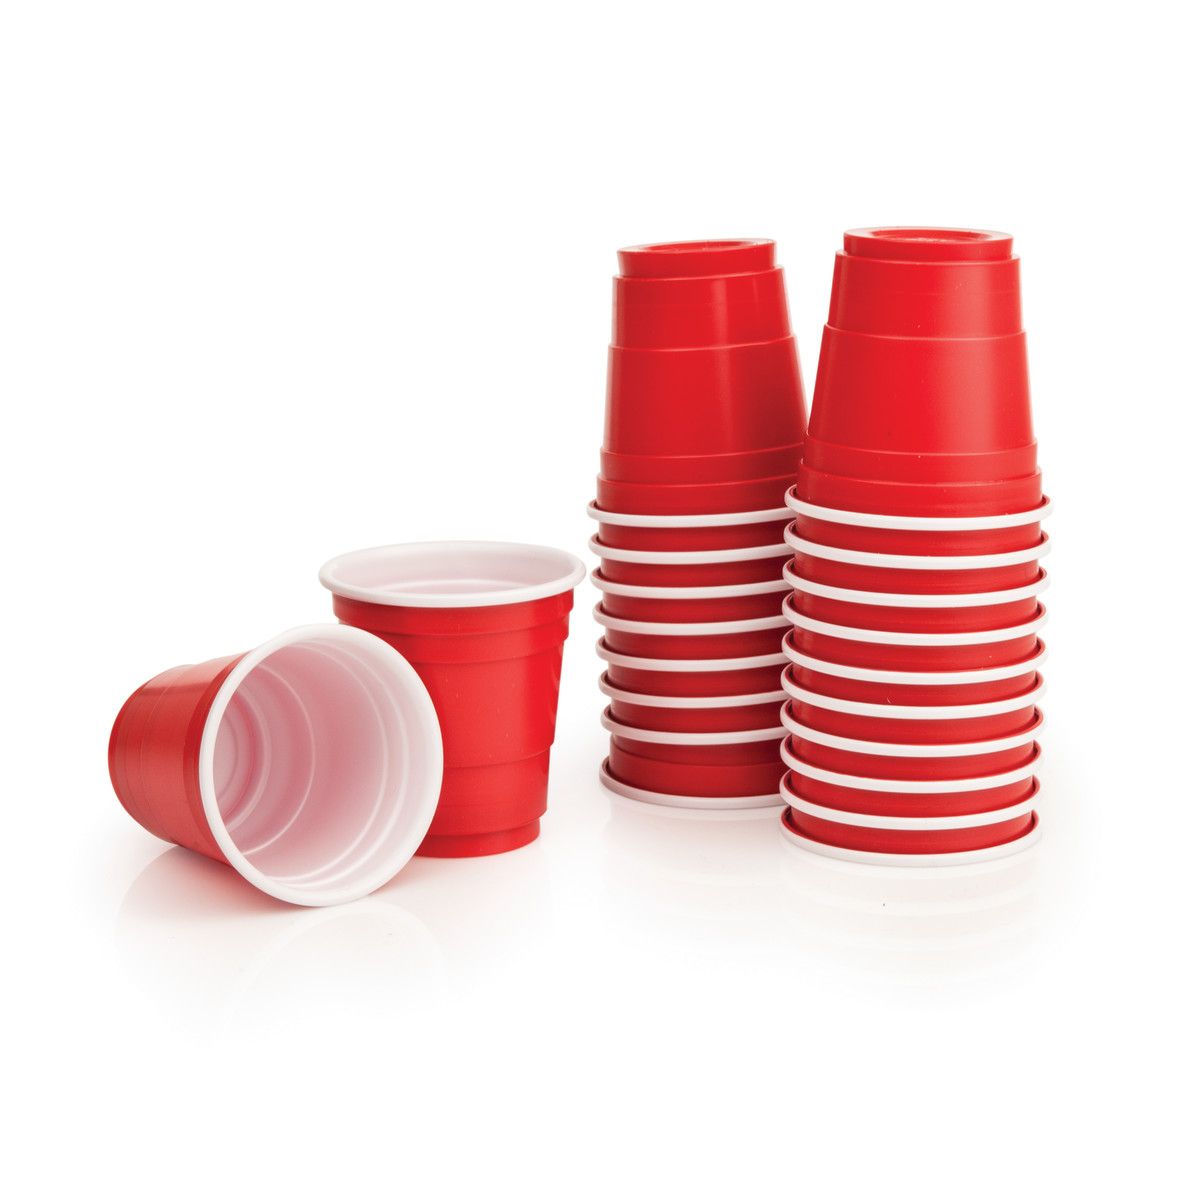 50 Pcs Red Shot Glasses, 2 Oz Small Plastic Reusable Party Cups